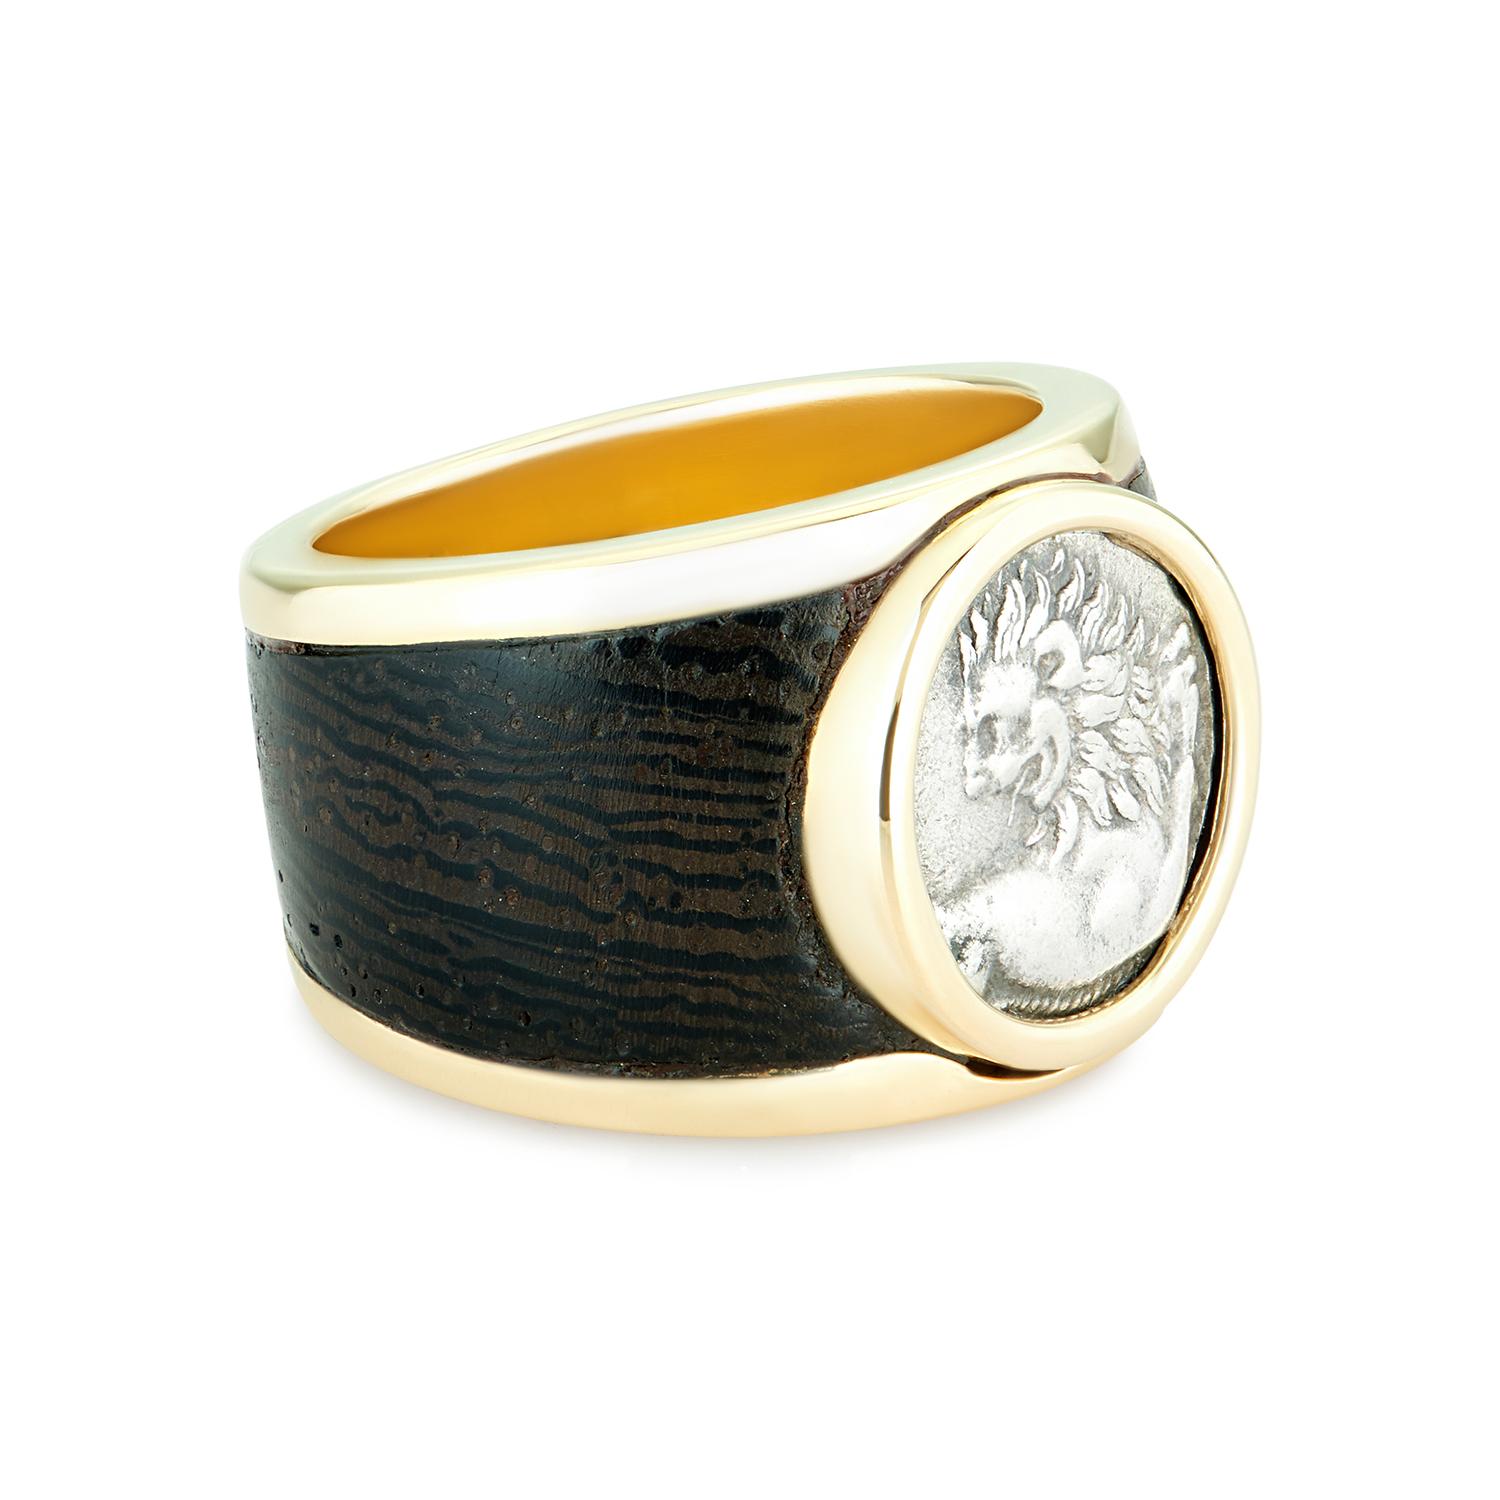 This unique DUBINI coin ring from the 'Empires' collection features an authentic Thracian silver coin minted circa 4th century B.C. set in 18kt yellow gold with wooden inlay.

Ring size available: 52

Additional sizes may be ordered with a lead time